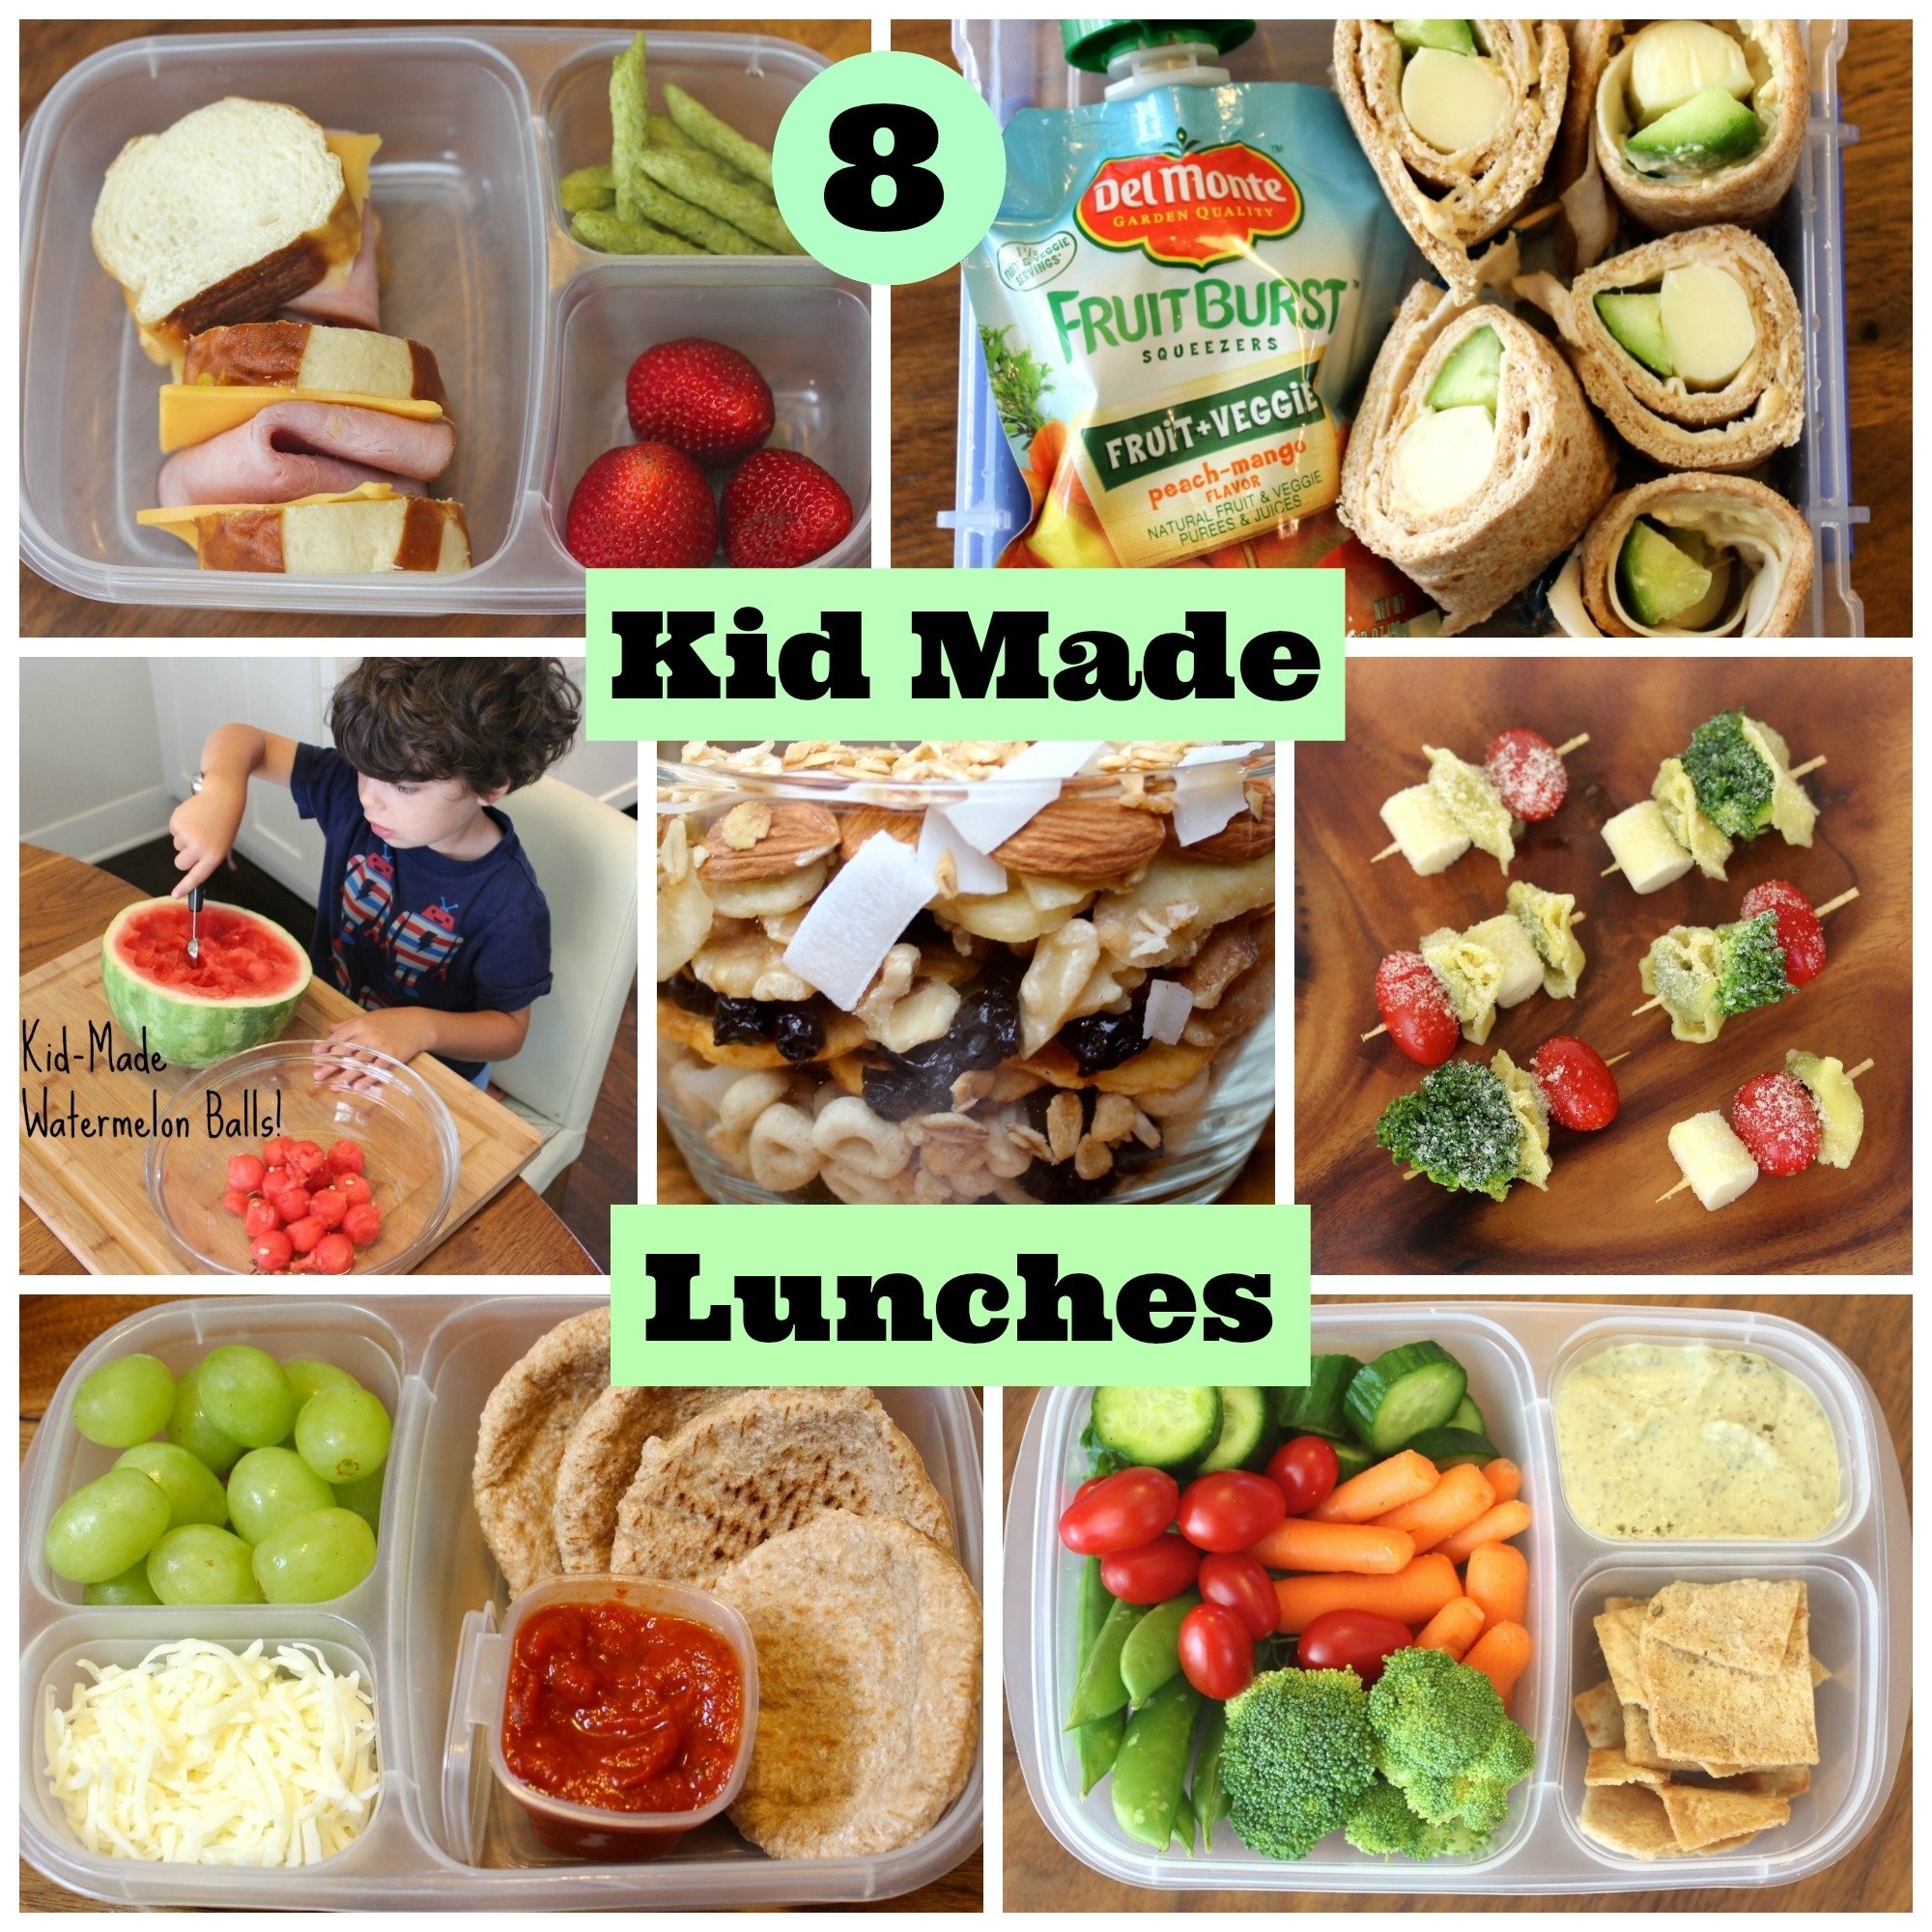 10 Trendy Good Ideas For School Lunches 4 healthy school lunches your kids can make themselves babble 1 2022